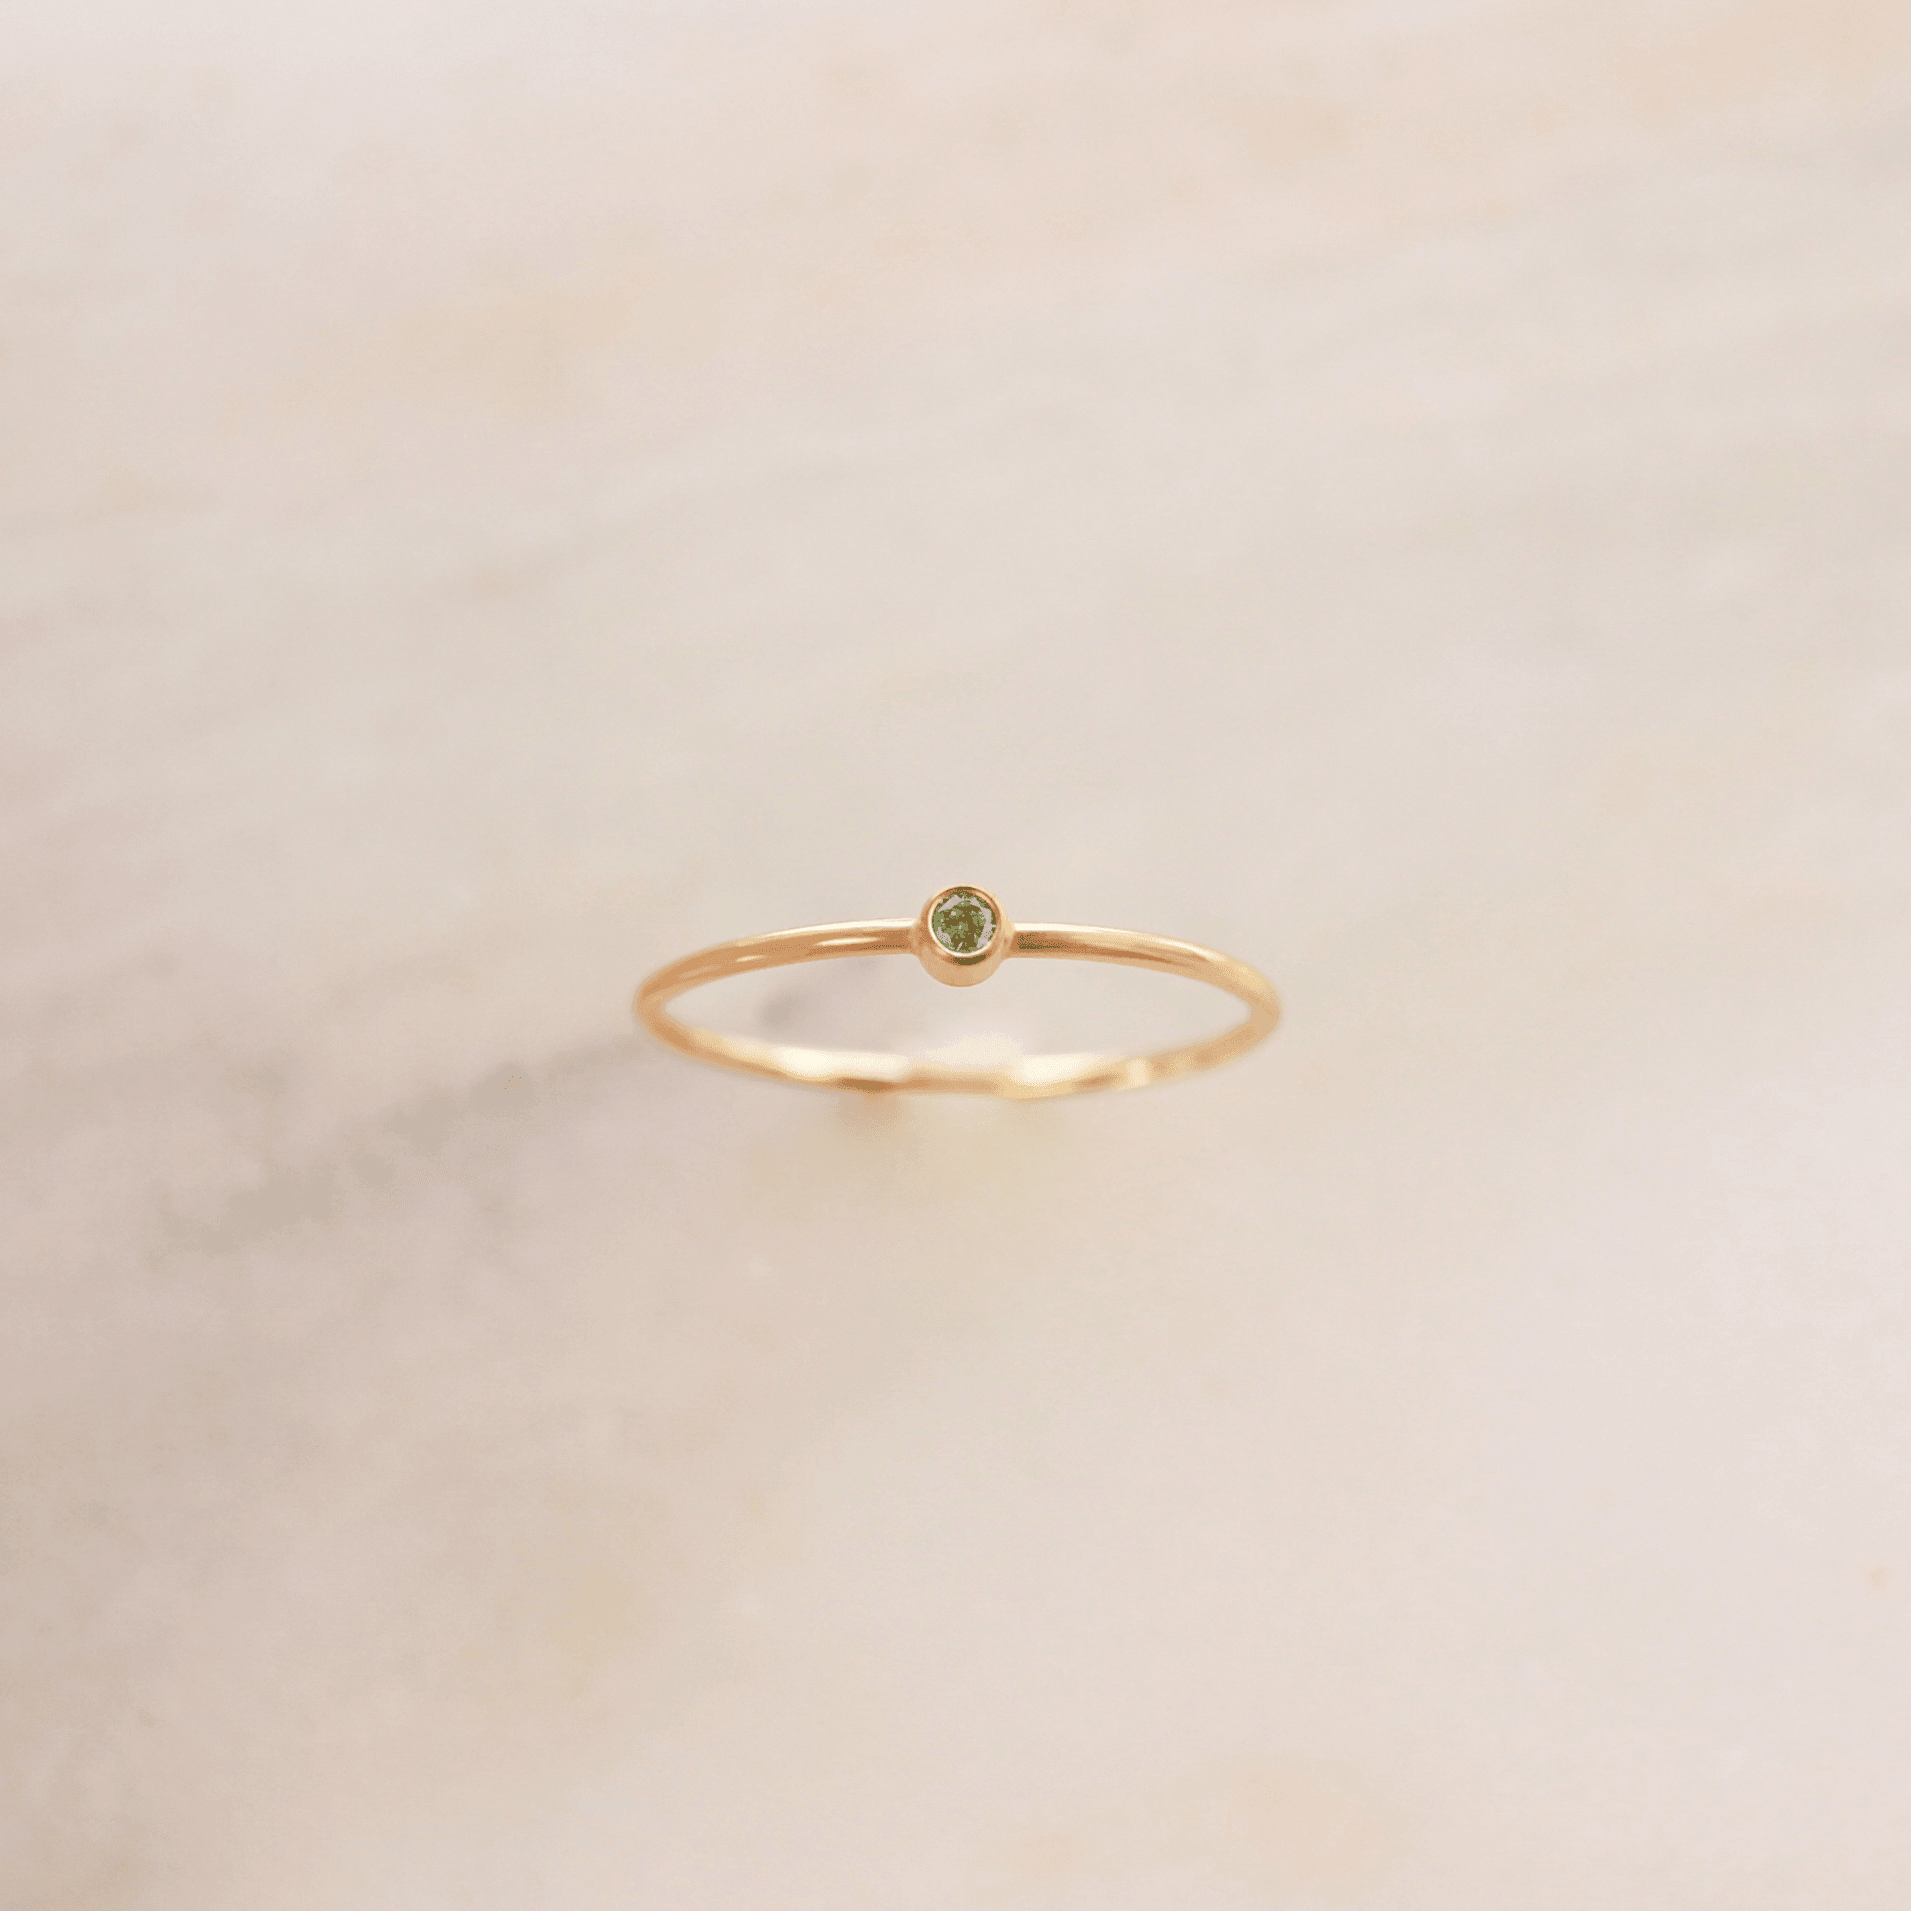 Tiny August Birthstone Ring ∙ Peridot - Nolia Jewelry - Meaningful + Sustainably Handcrafted Jewelry